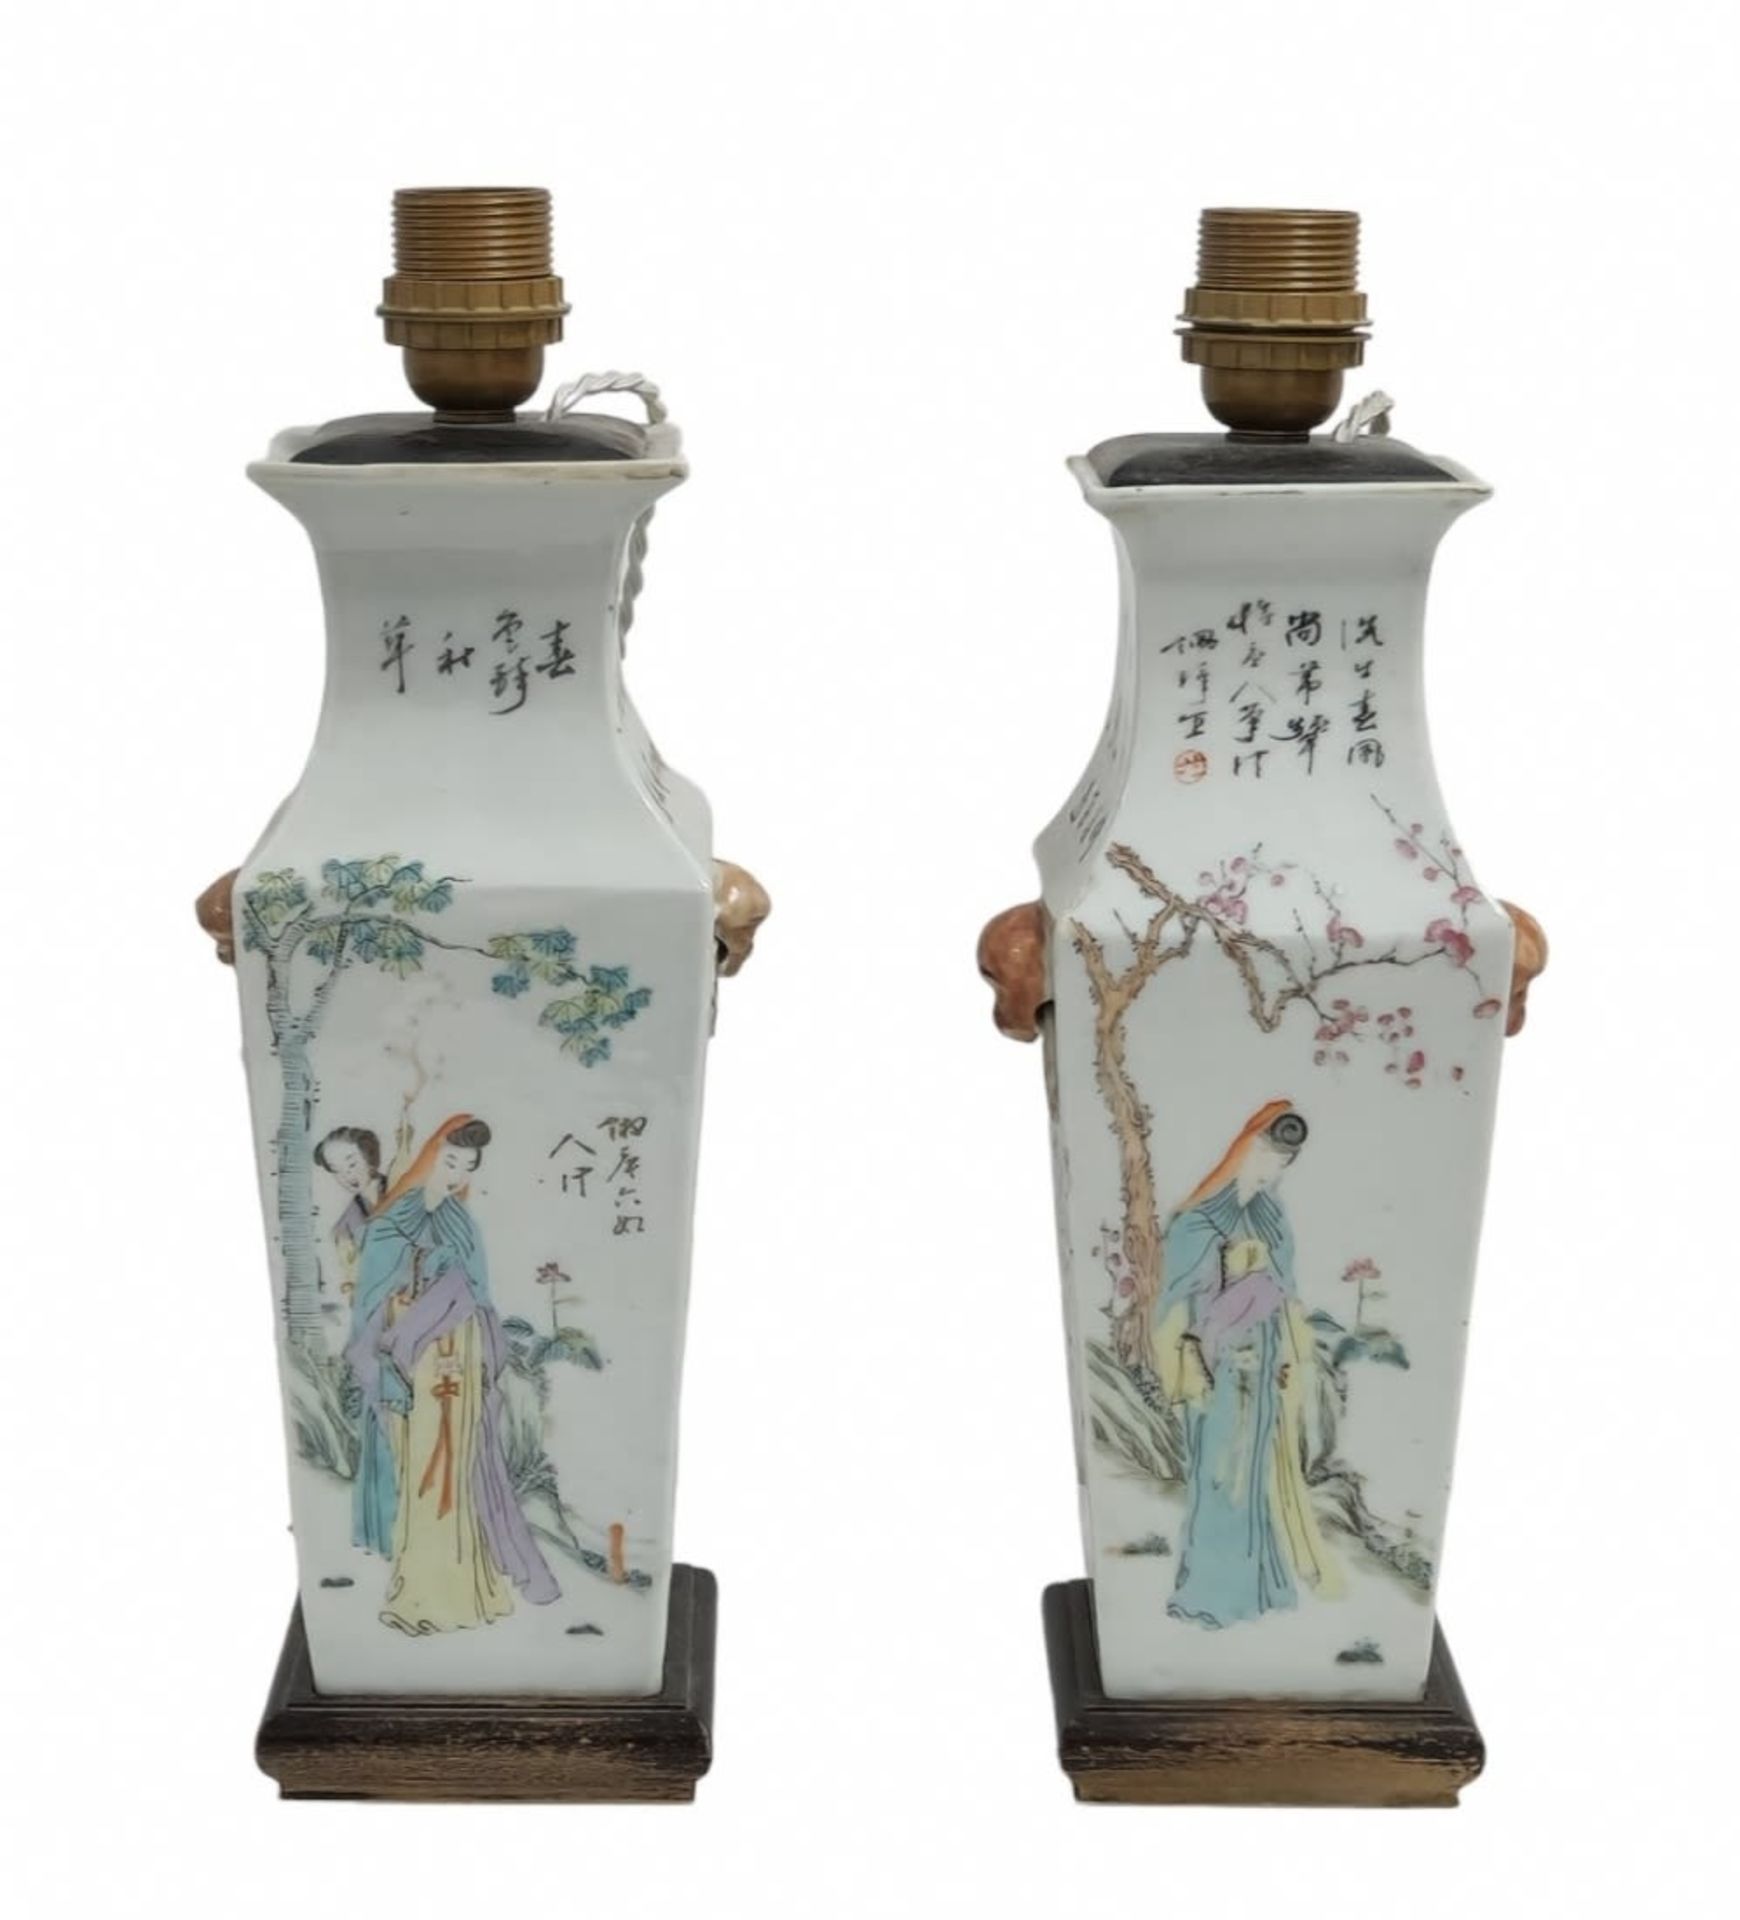 A pair of Chinese bases (legs) for table lamps, square porcelain pots, including wooden bases and - Bild 3 aus 4